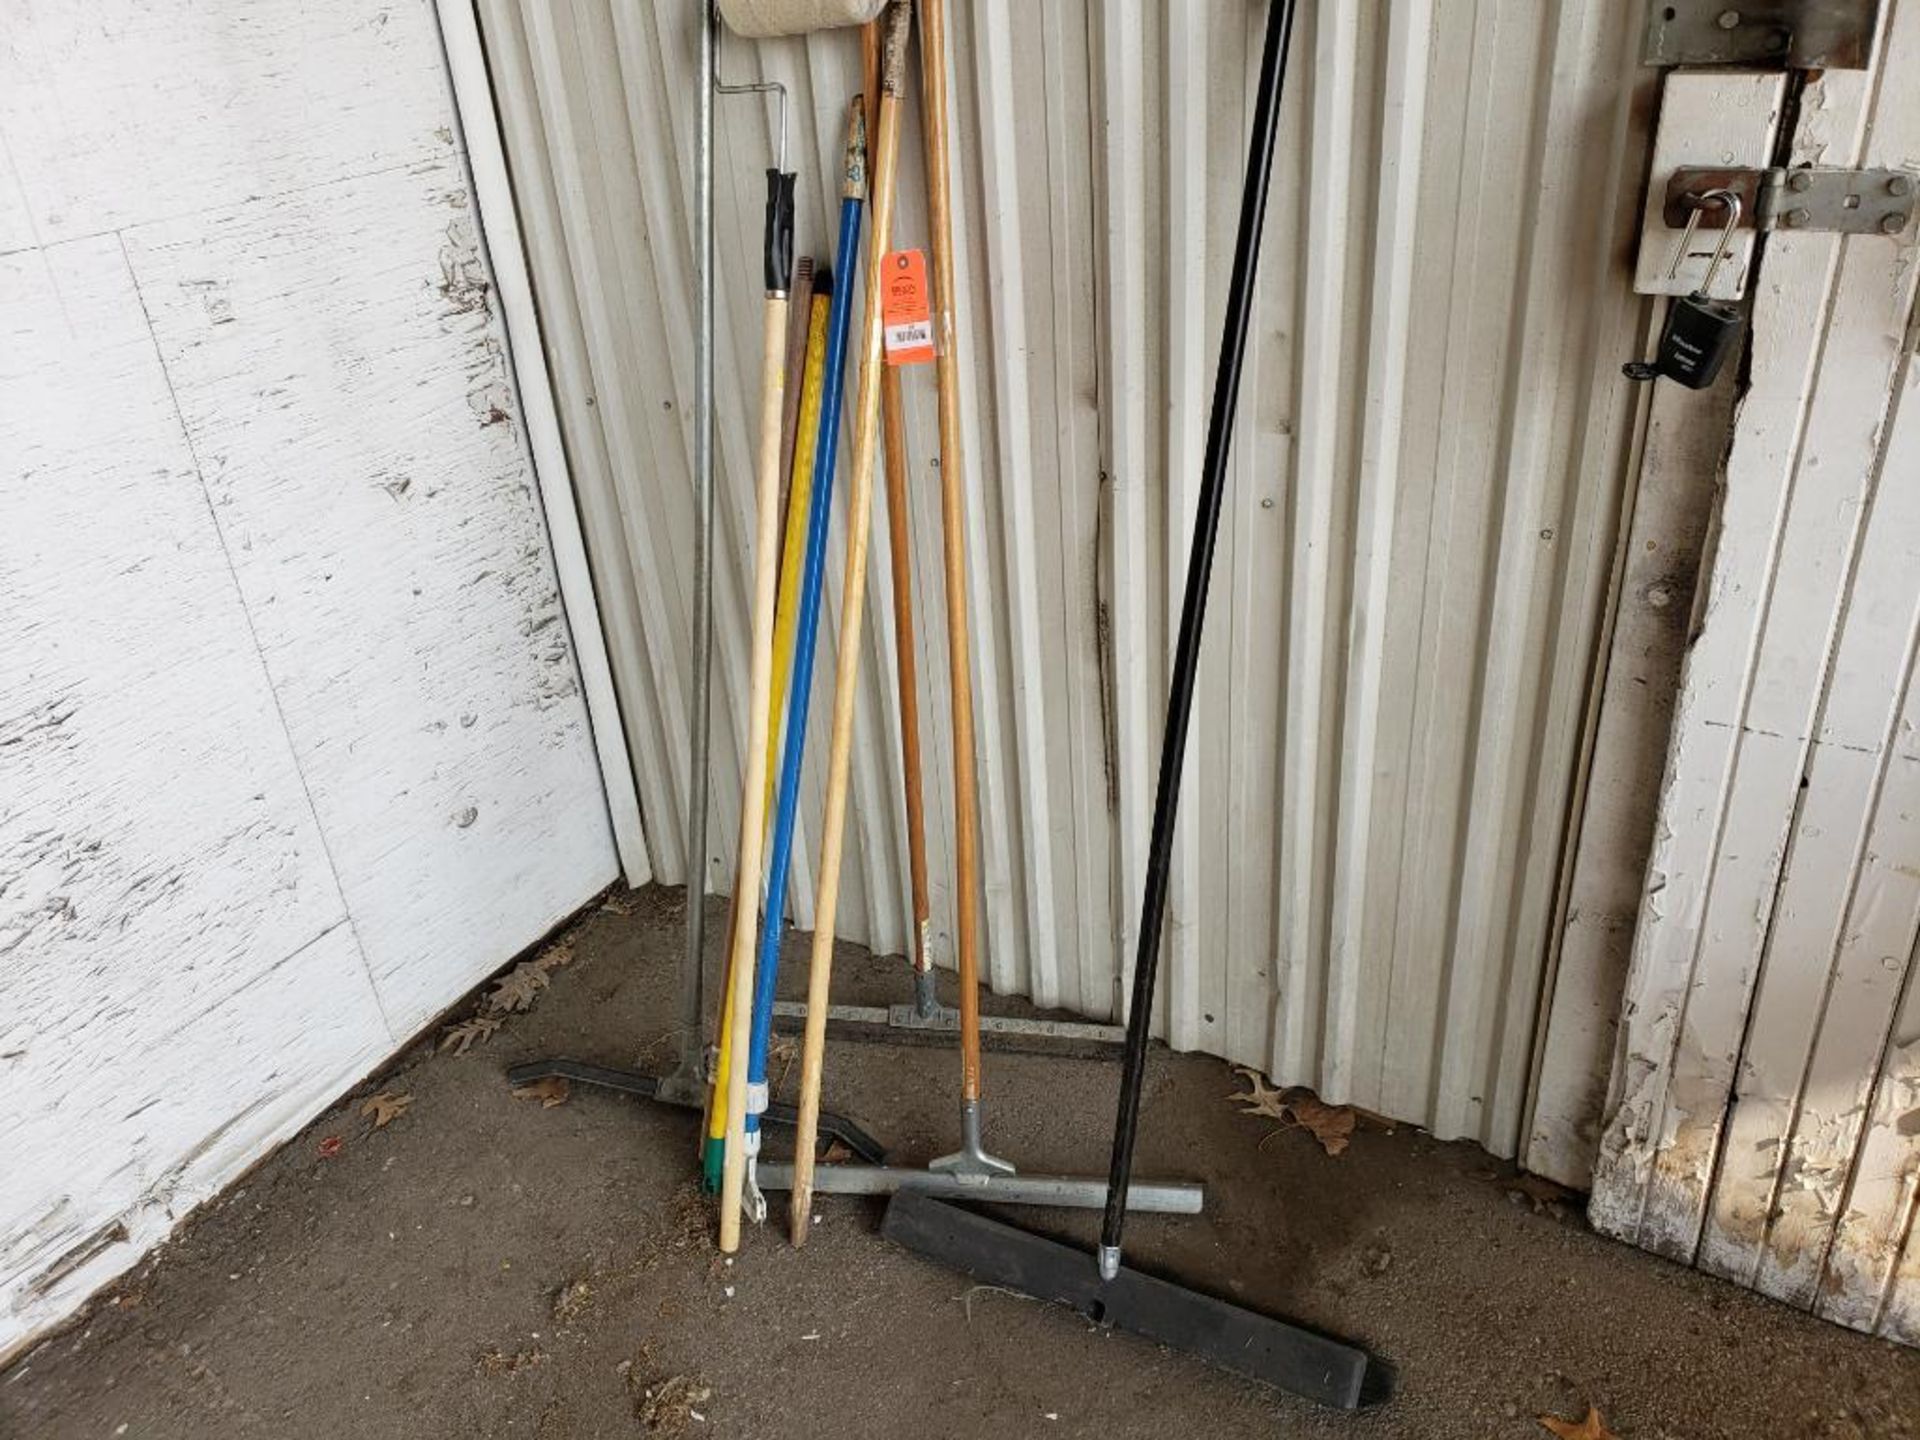 Assorted shop cleaning tools.